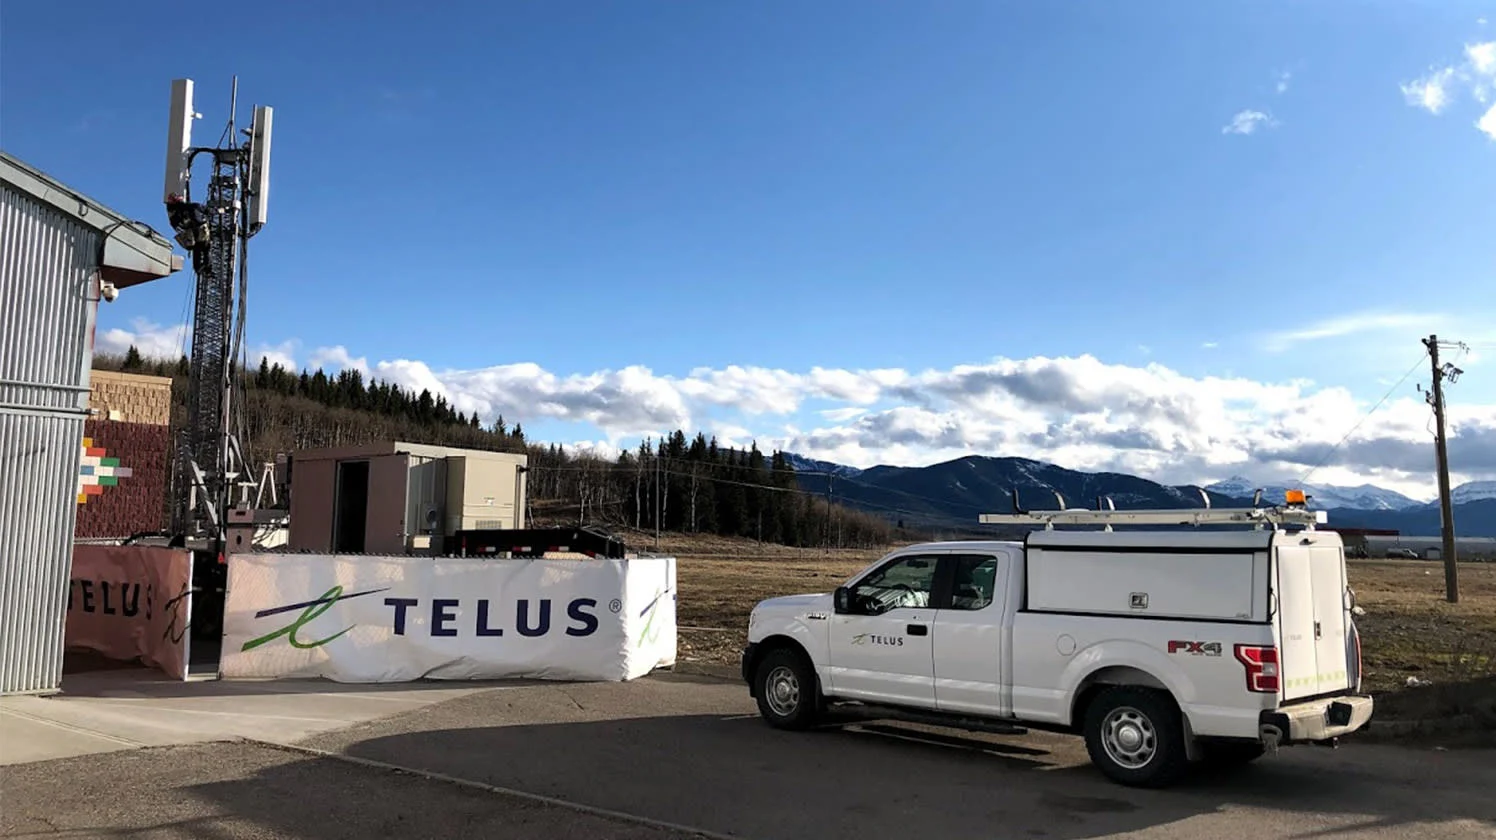 Working with community officials, TELUS was given the green light to set up the COW at the Chief Jacob Bearspaw School, overlooking Eden Valley.